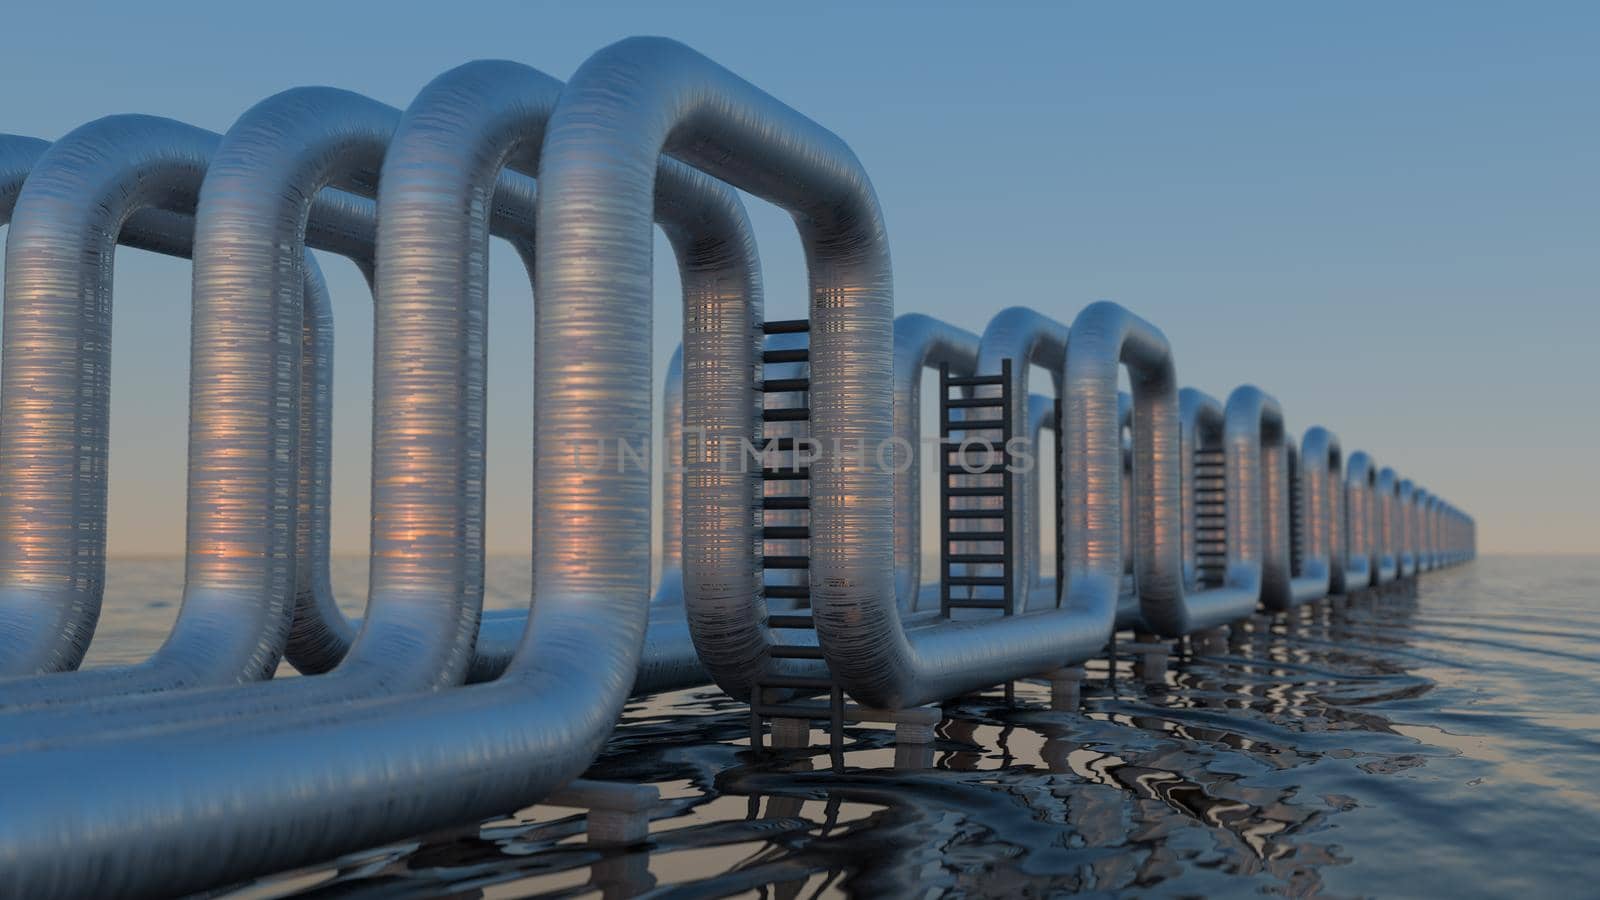 steel long pipes in crude oil factory on water. 3d illustration